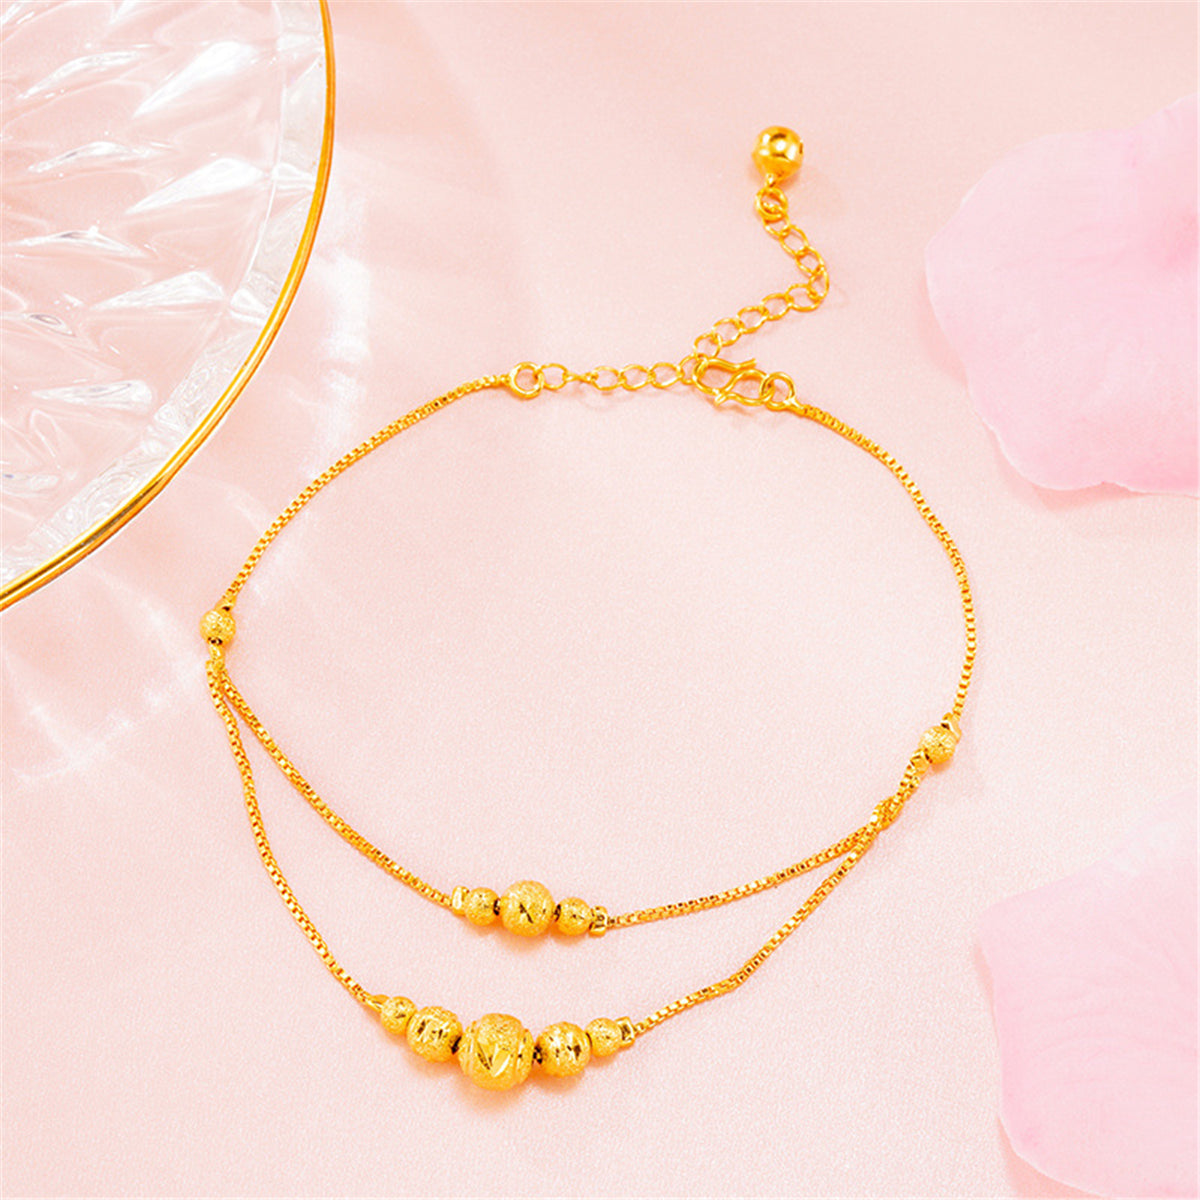 24K Gold-Plated Round Bead Layered Anklet